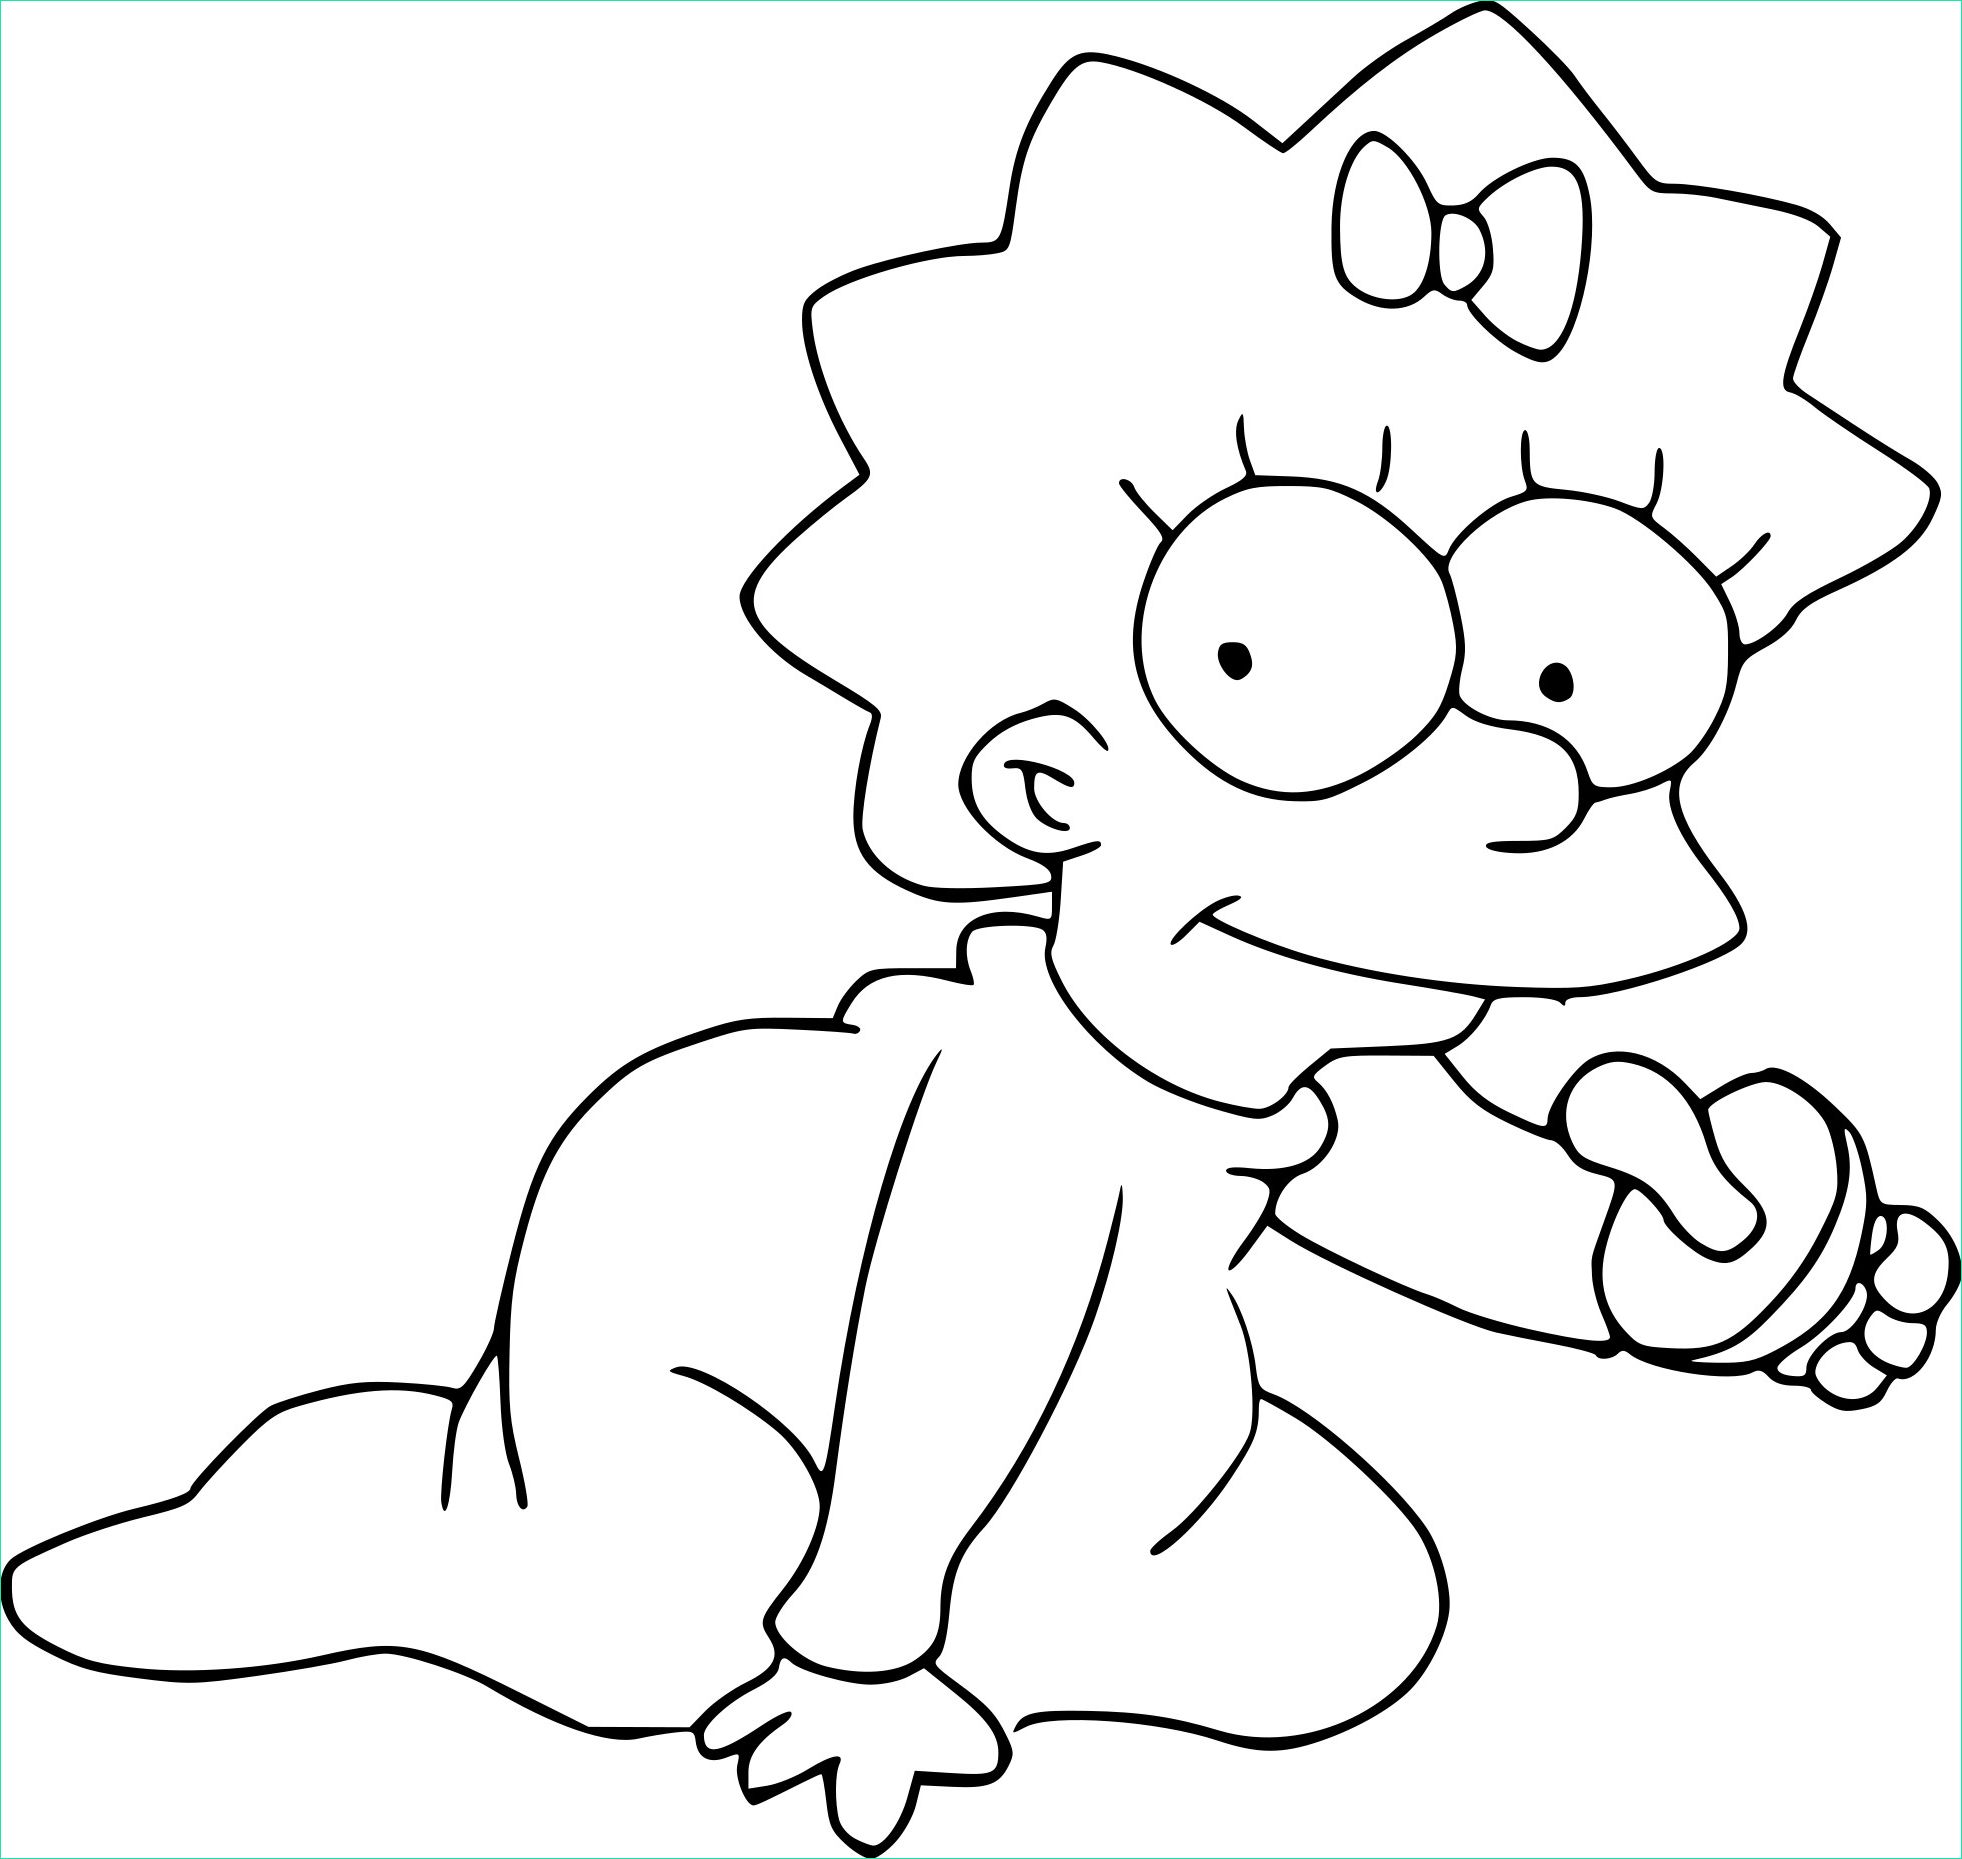 Simpson Coloriage Cool Collection Simpson Dessin A Imprimer Related Keywords &amp; Suggestions